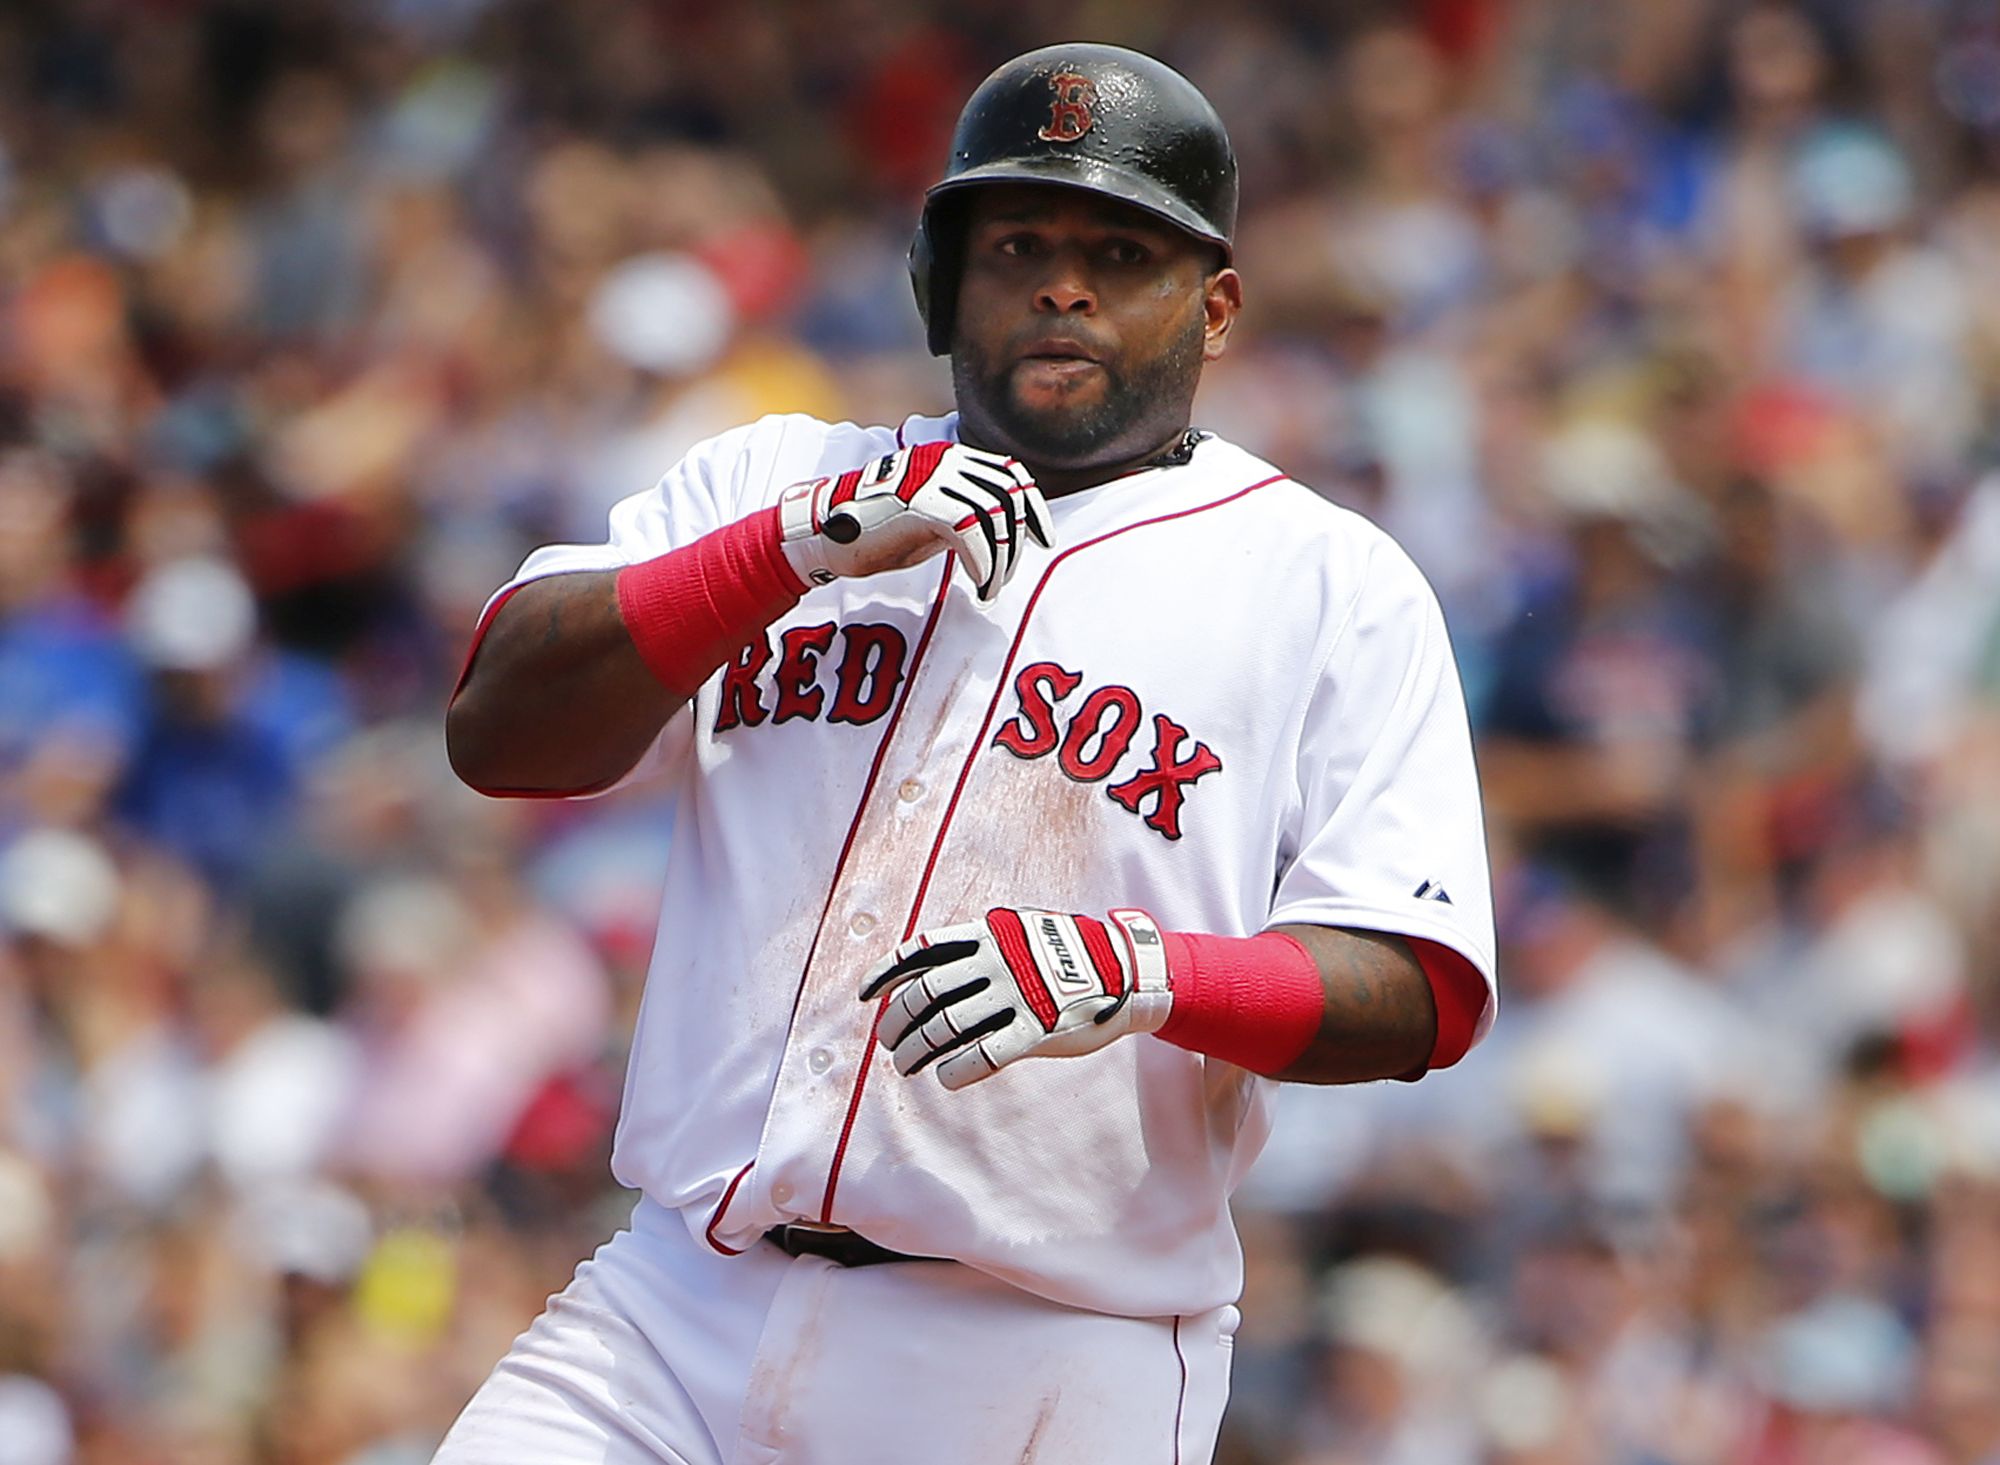 Red Sox send Pablo Sandoval packing - The Boston Globe